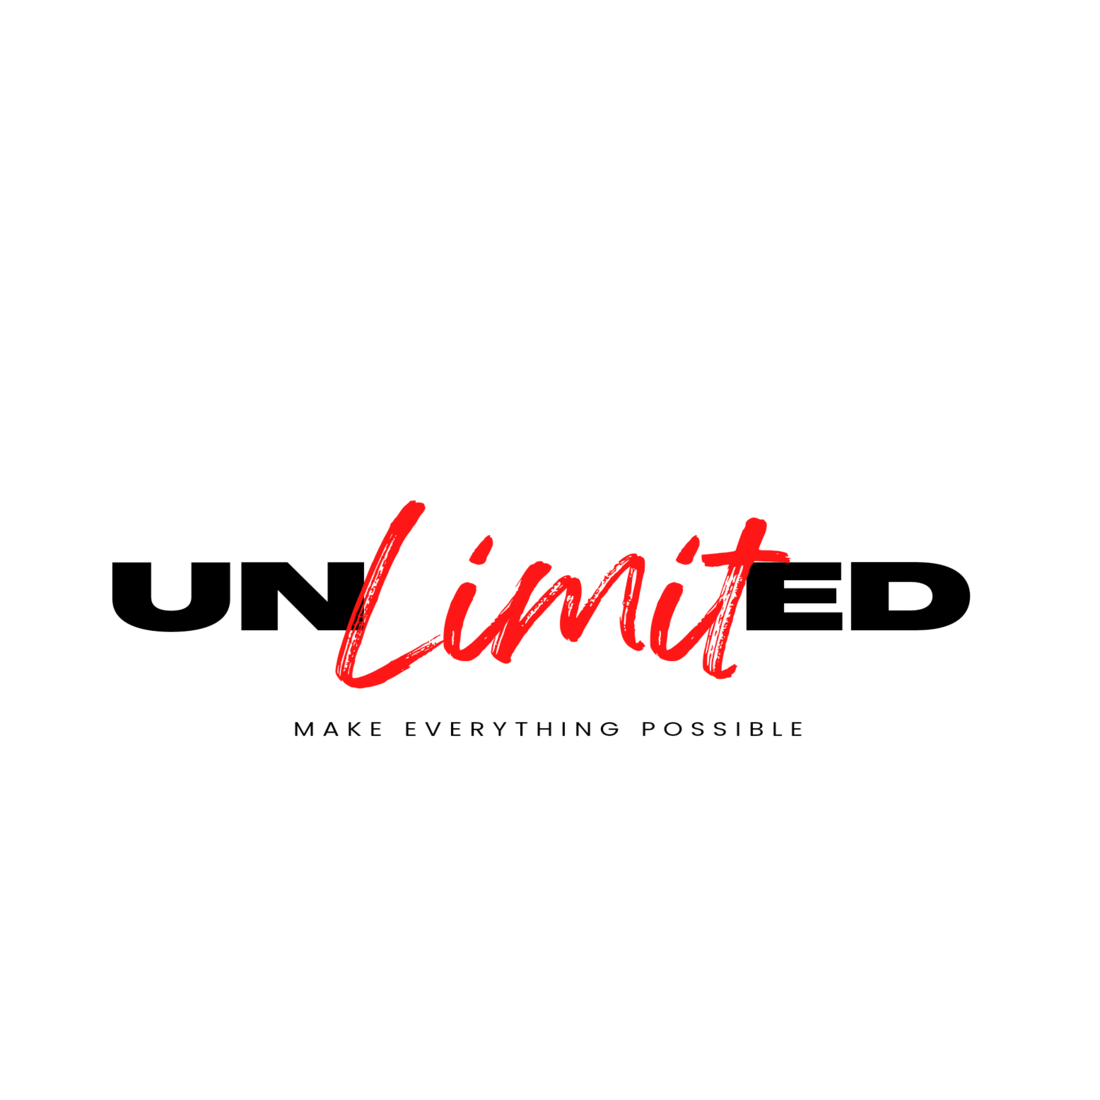 UNLIMITED preview image.